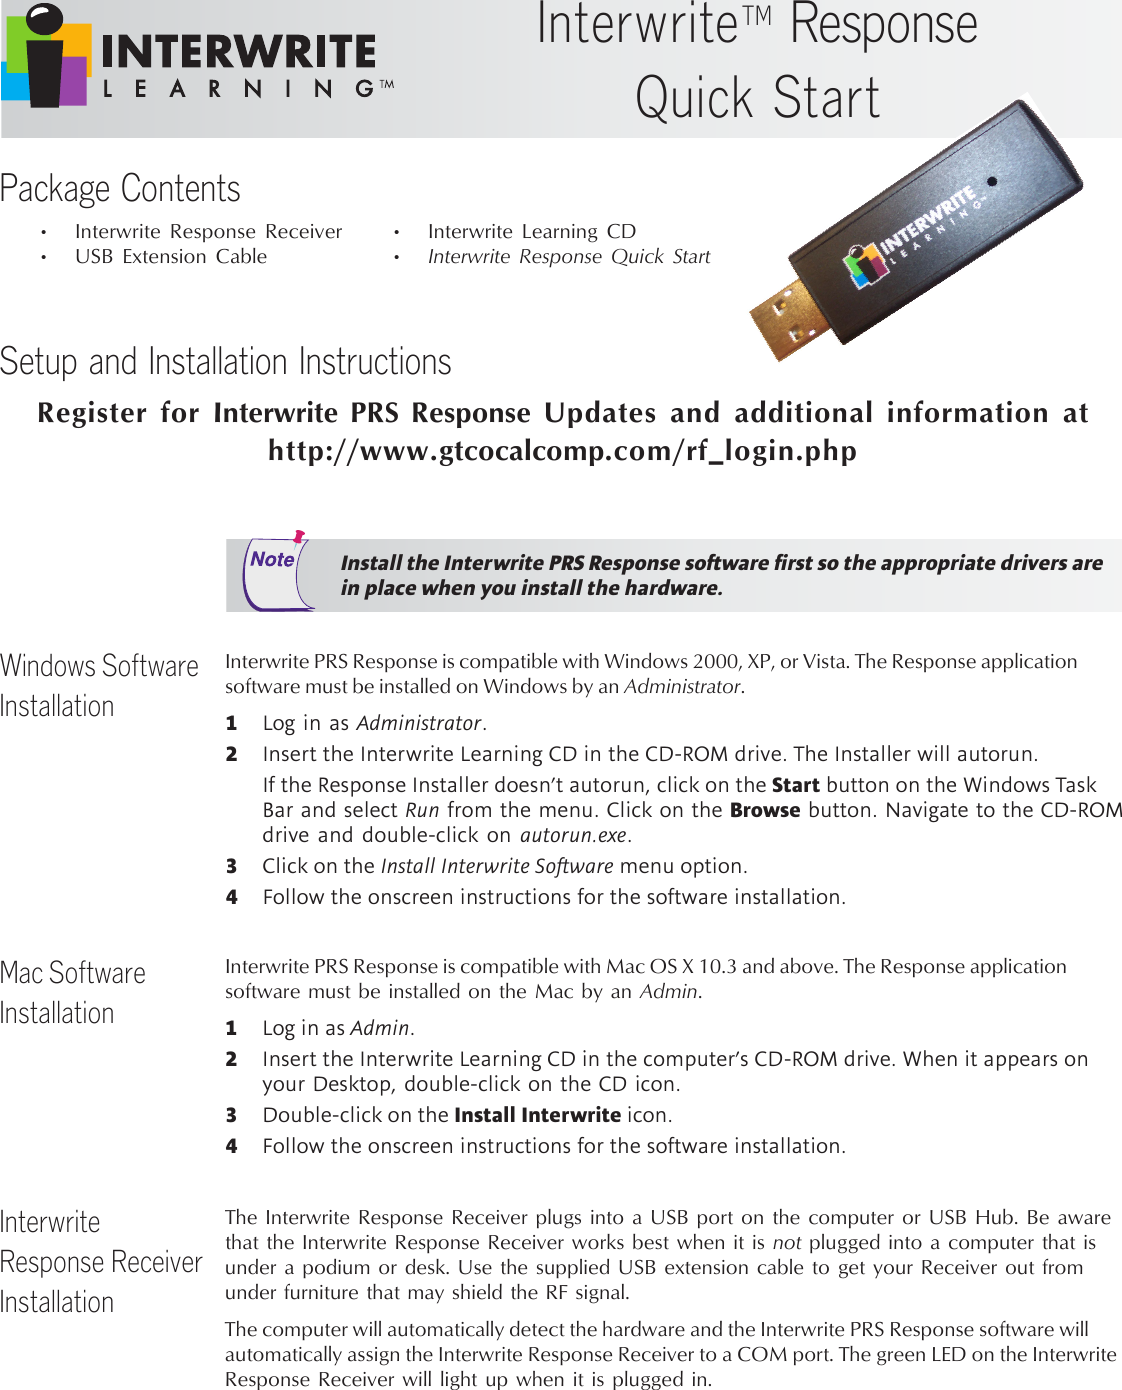 Setup and Installation InstructionsWindows SoftwareInstallationMac SoftwareInstallationInterwrite PRS Response is compatible with Windows 2000, XP, or Vista. The Response applicationsoftware must be installed on Windows by an Administrator.1Log in as Administrator.2Insert the Interwrite Learning CD in the CD-ROM drive. The Installer will autorun.If the Response Installer doesn’t autorun, click on the Start button on the Windows TaskBar and select Run from the menu. Click on the Browse button. Navigate to the CD-ROMdrive and double-click on autorun.exe.3Click on the Install Interwrite Software menu option.4Follow the onscreen instructions for the software installation.Register for Interwrite PRS Response Updates and additional information athttp://www.gtcocalcomp.com/rf_login.phpInstall the Interwrite PRS Response software first so the appropriate drivers arein place when you install the hardware.Interwrite PRS Response is compatible with Mac OS X 10.3 and above. The Response applicationsoftware must be installed on the Mac by an Admin.1Log in as Admin.2Insert the Interwrite Learning CD in the computer’s CD-ROM drive. When it appears onyour Desktop, double-click on the CD icon.3Double-click on the Install Interwrite icon.4Follow the onscreen instructions for the software installation.InterwriteTM ResponseQuick StartPackage Contents• Interwrite Response Receiver• USB Extension Cable• Interwrite Learning CD•Interwrite Response Quick StartInterwriteResponse ReceiverInstallationThe Interwrite Response Receiver plugs into a USB port on the computer or USB Hub. Be awarethat the Interwrite Response Receiver works best when it is not plugged into a computer that isunder a podium or desk. Use the supplied USB extension cable to get your Receiver out fromunder furniture that may shield the RF signal.The computer will automatically detect the hardware and the Interwrite PRS Response software willautomatically assign the Interwrite Response Receiver to a COM port. The green LED on the InterwriteResponse Receiver will light up when it is plugged in.